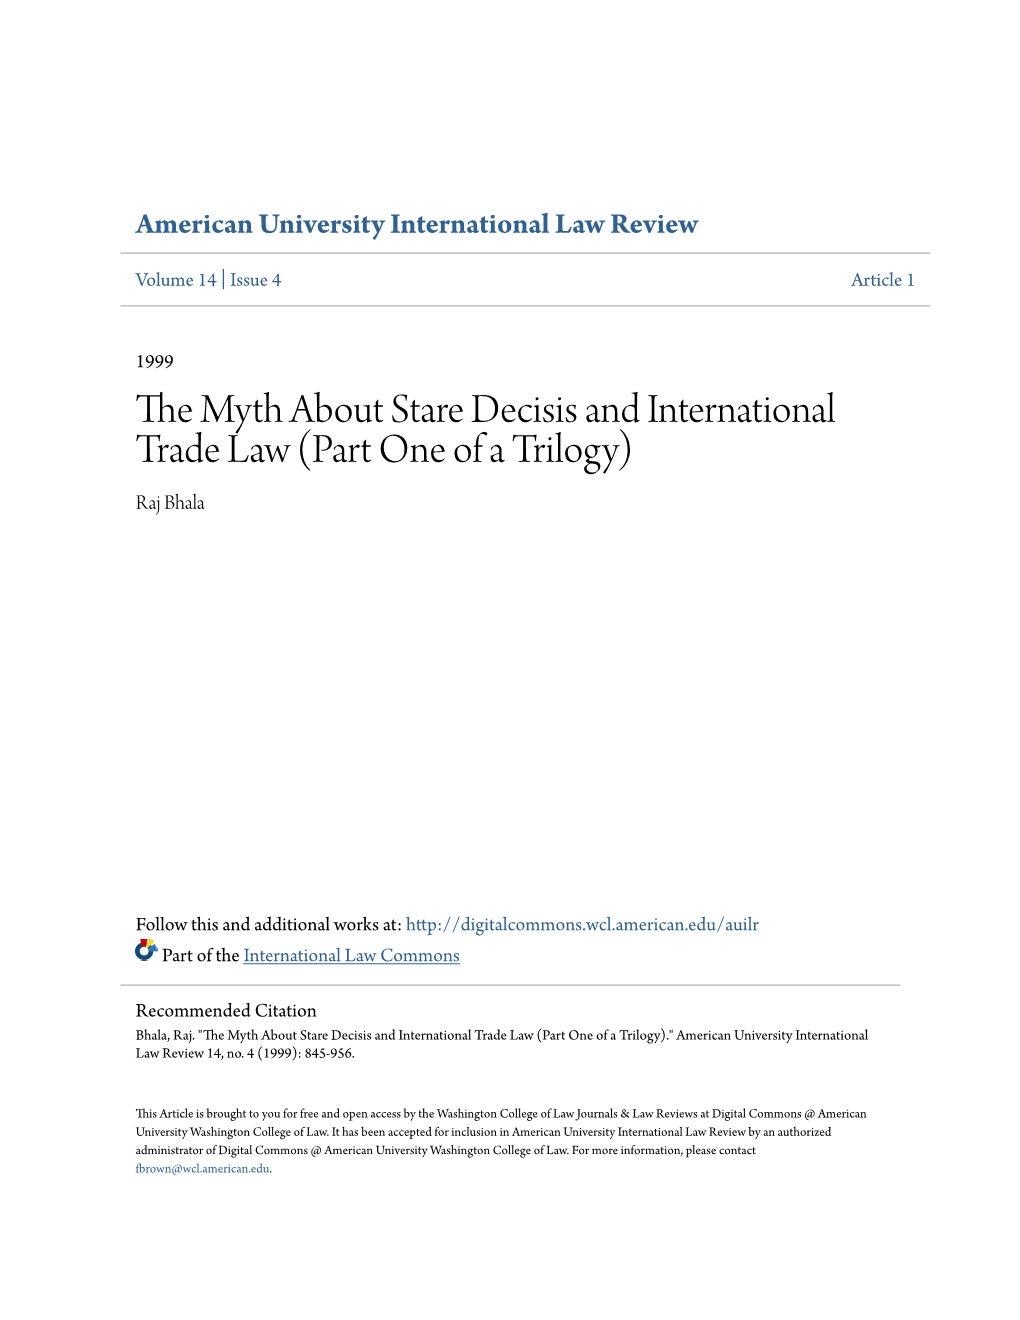 THE MYTH ABOUT STARE DECISIS and INTERNATIONAL TRADE LAW (PART ONE of a Trilogy)